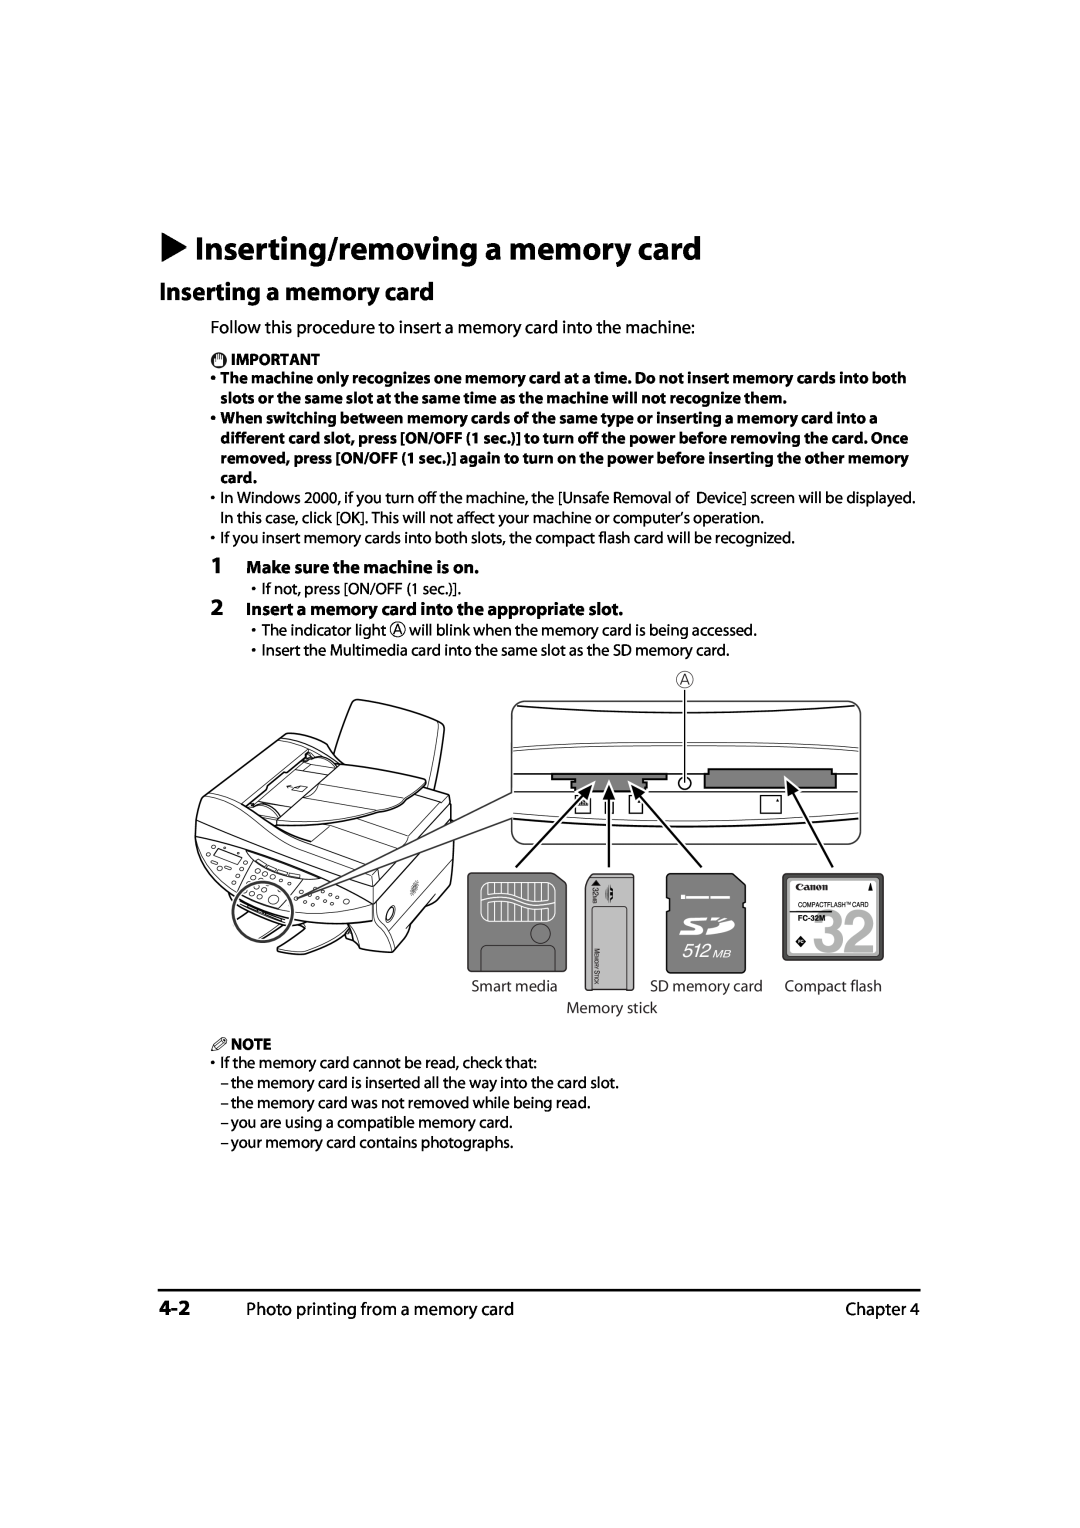 Canon MultiPASS MP730 Inserting/removing a memory card, Inserting a memory card, Make sure the machine is on, Memory stick 